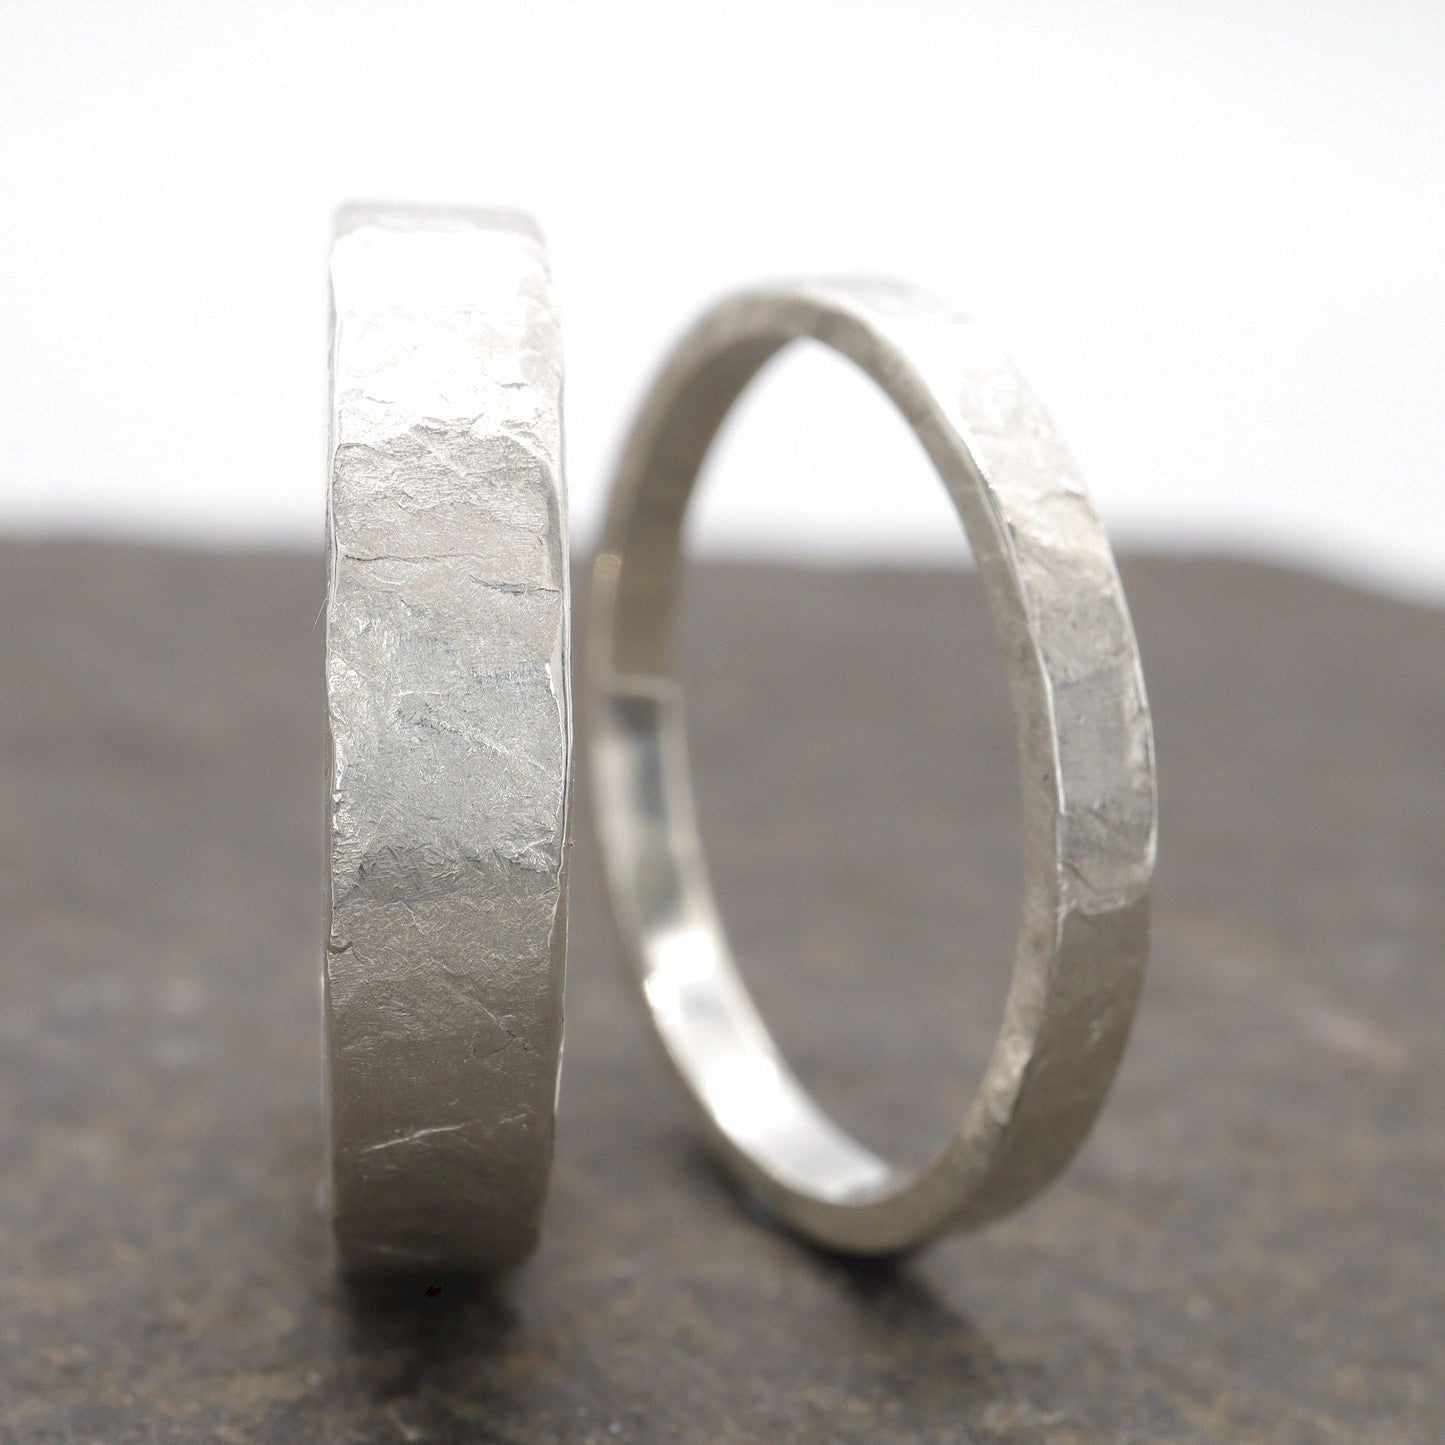 White gold matching wedding ring set - rustic flat hammered textured band - original men`s and women`s, Windermere design - 2mm and 4mm.